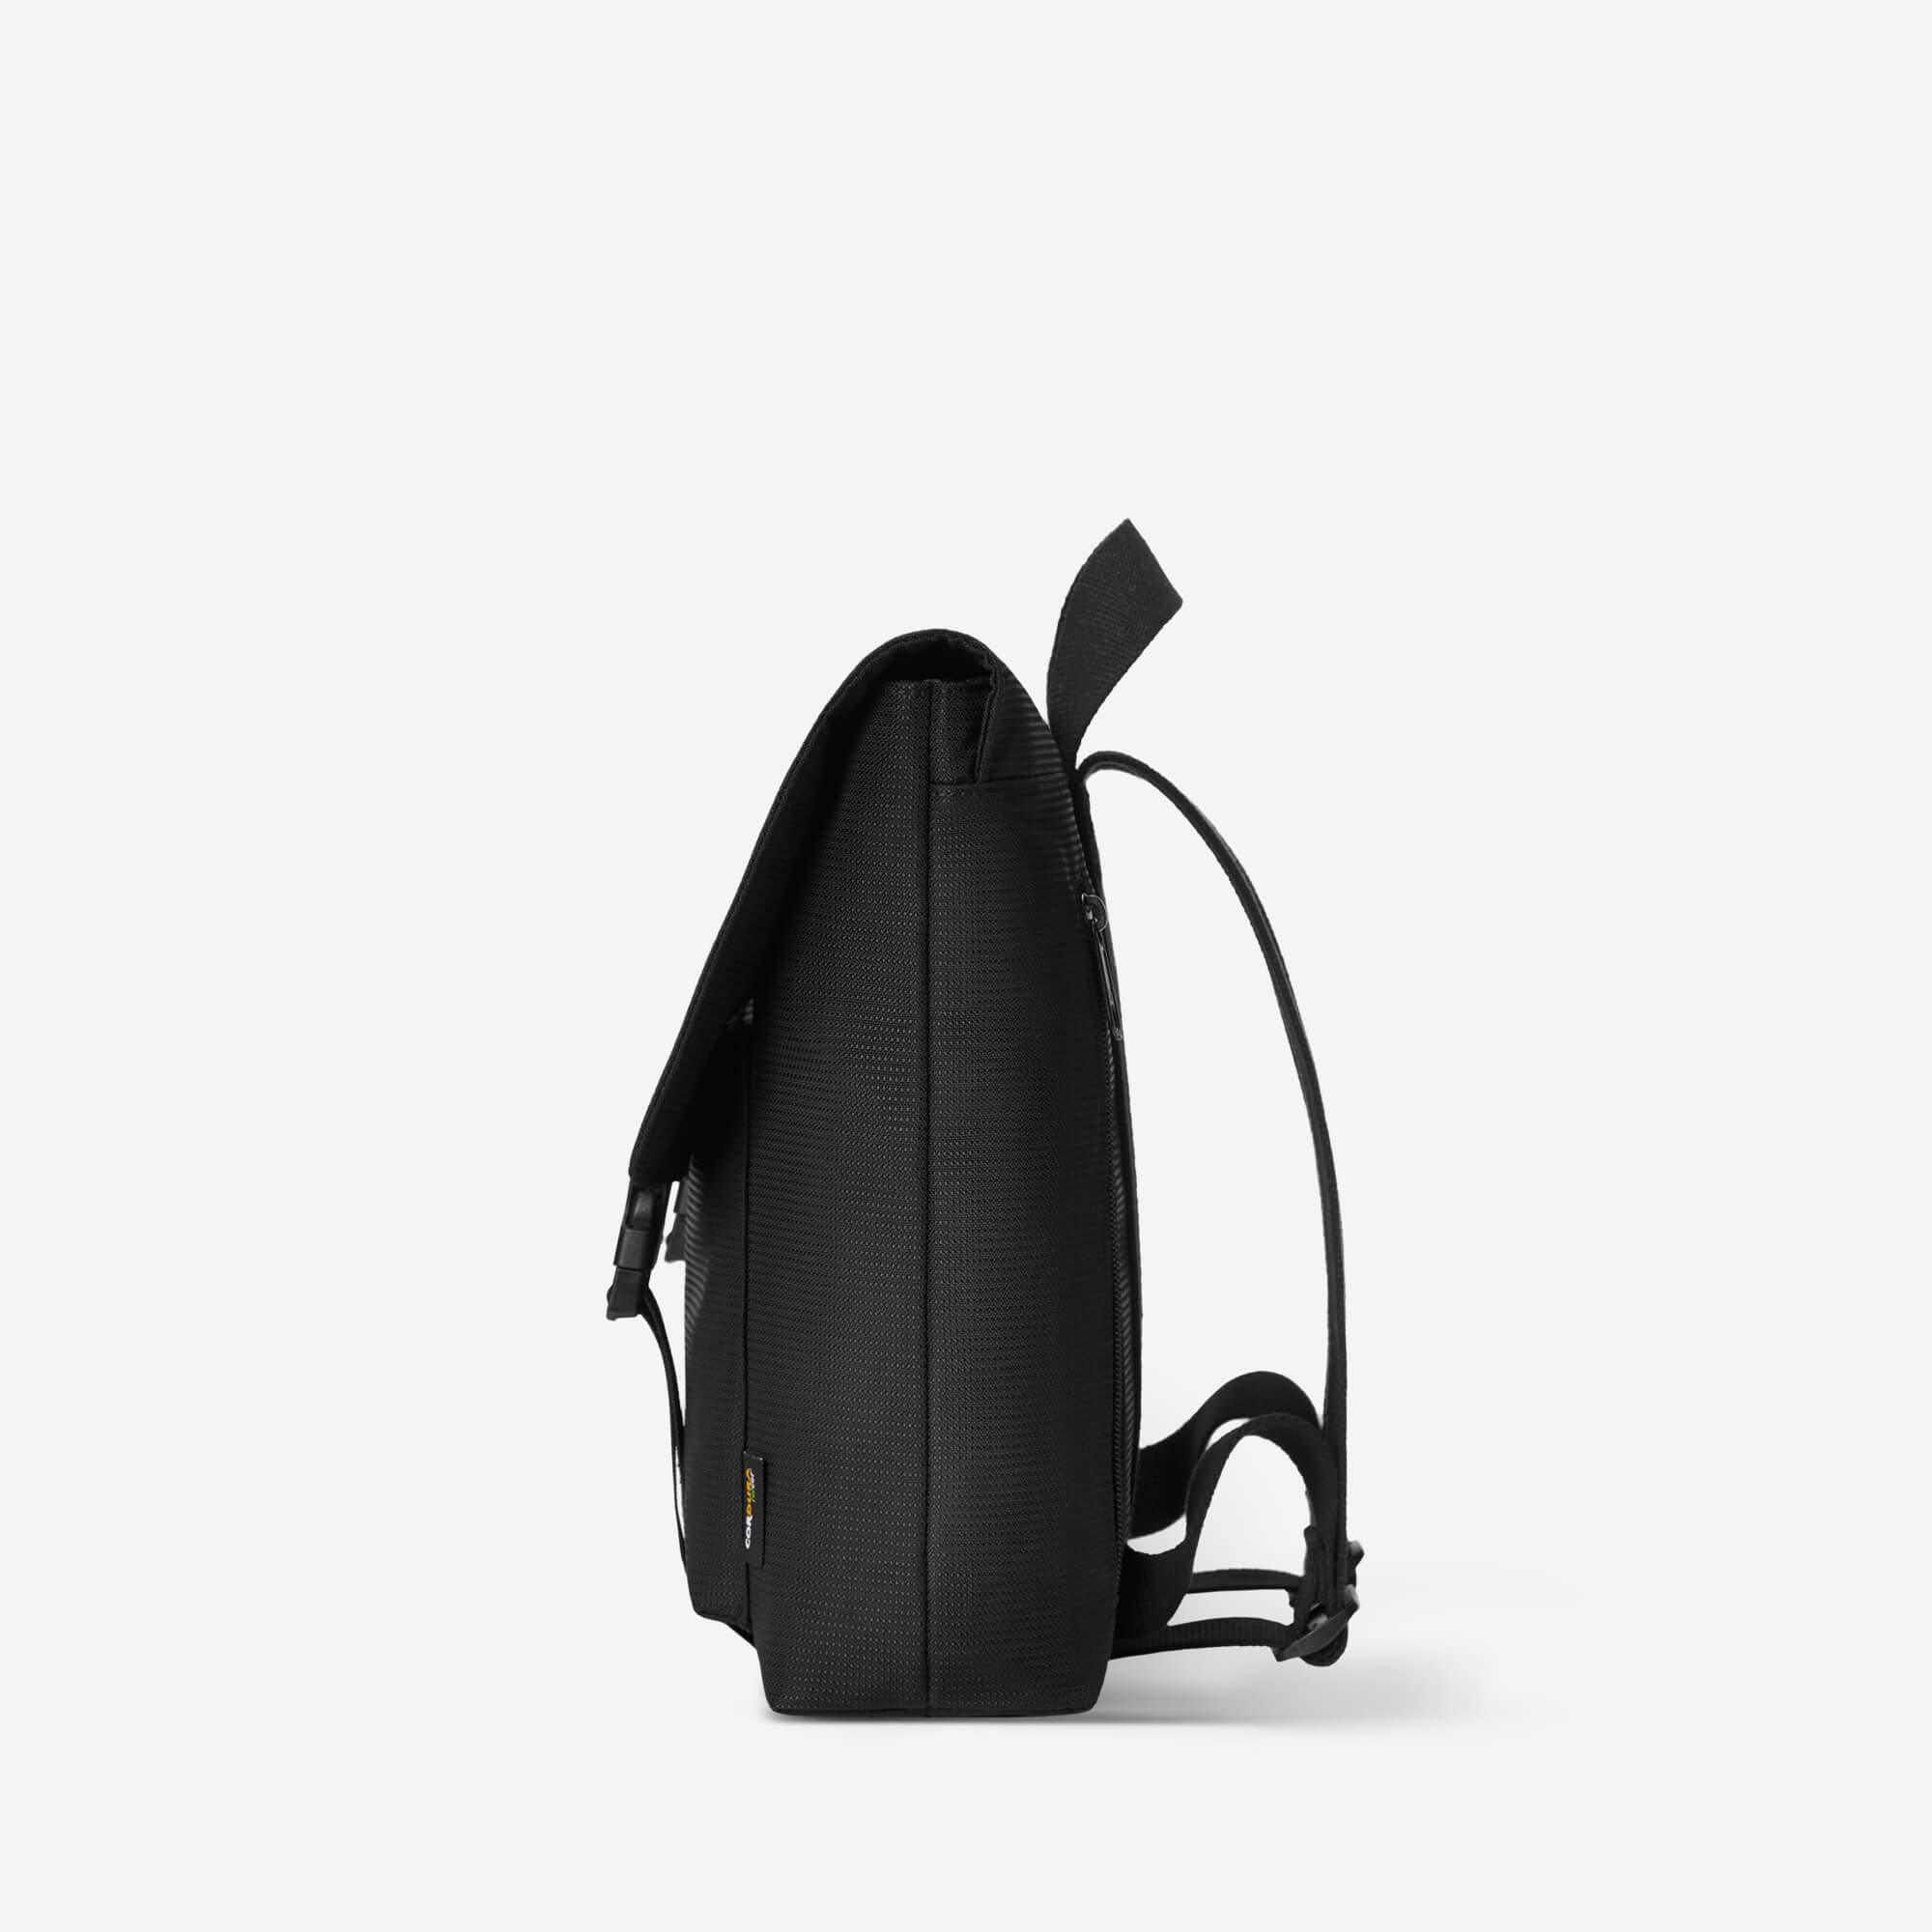 Oli Backpack | Recycloth | Recycled Nylon | 7L